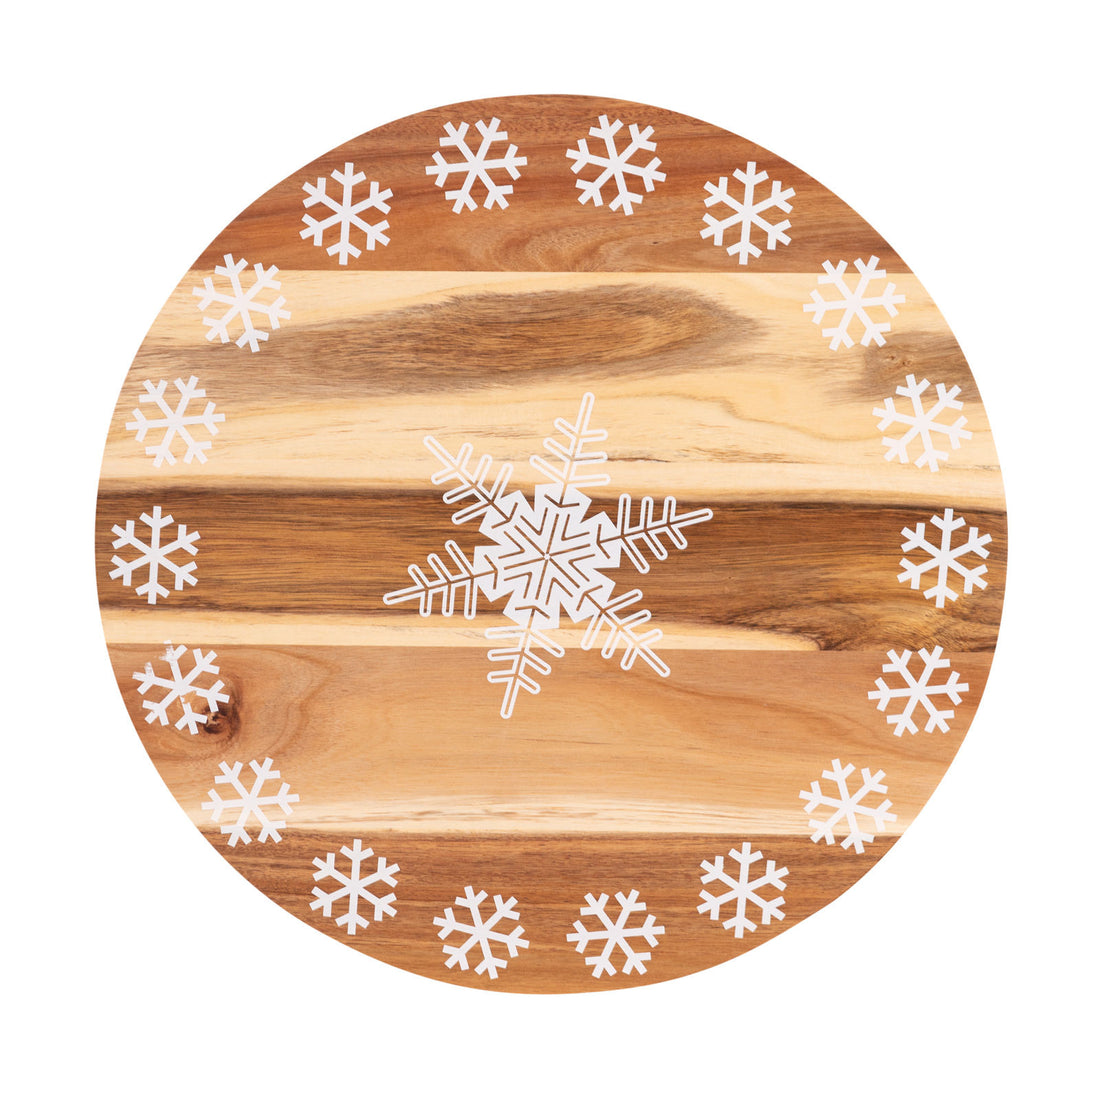 Bread and Butter 18 Inch Print Wooden Lazy Susan Tray - White Snowflake-Decorations-PEROZ Accessories